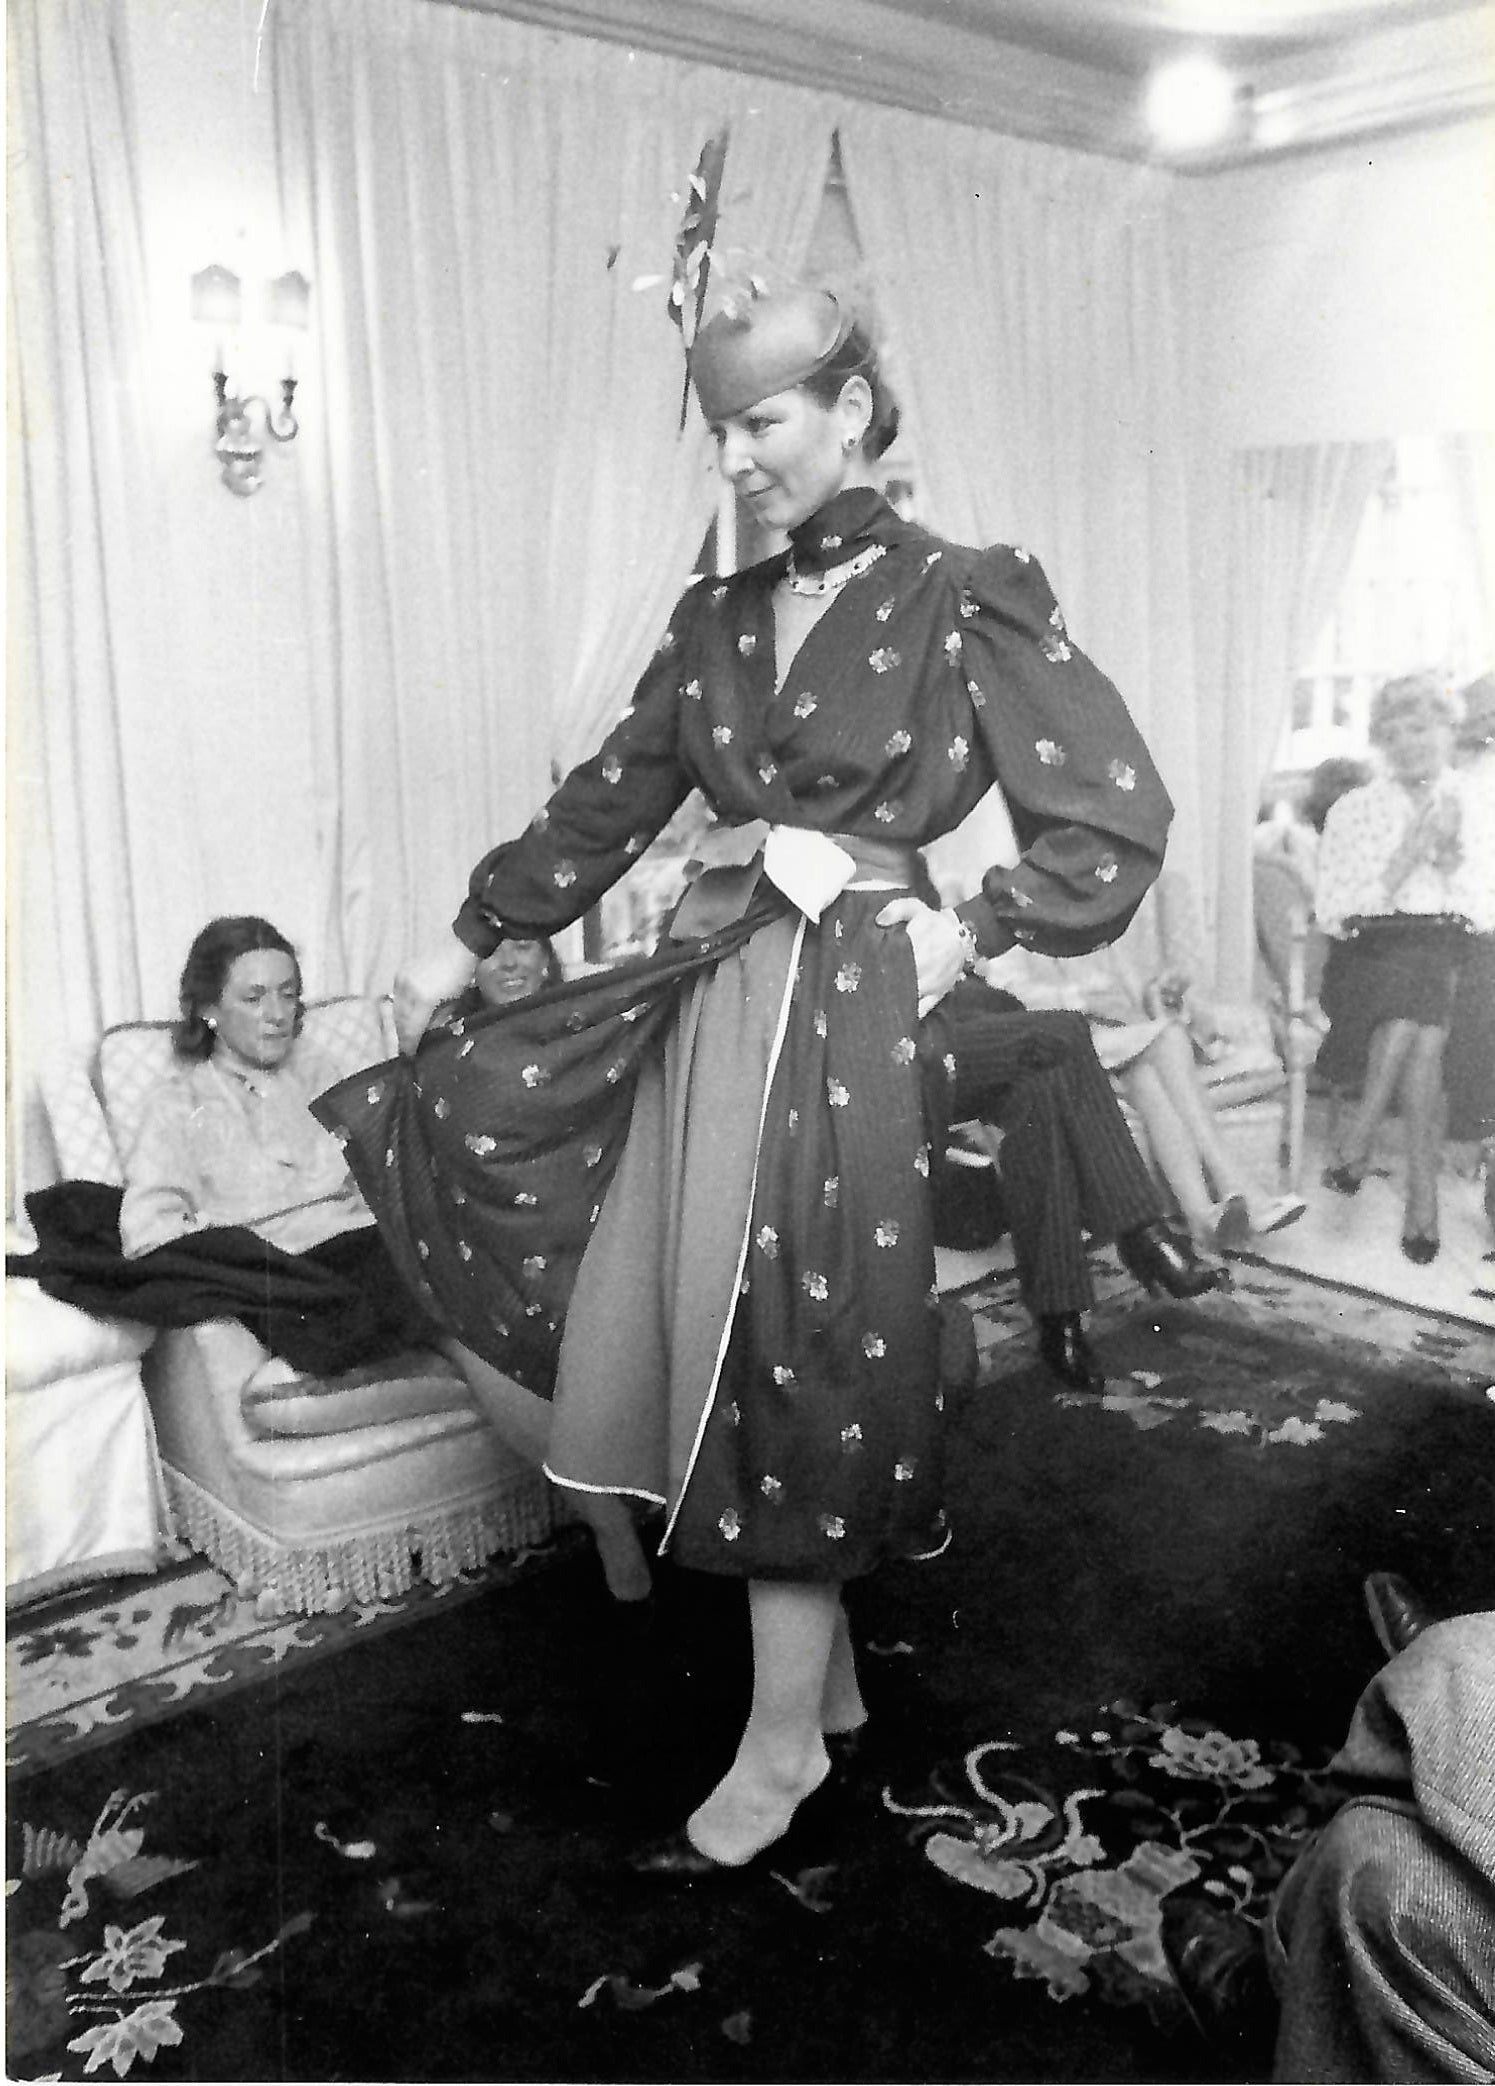 Model in Helga Kienel Couture, the then couture/fashion brand of fashion designer Helga Okan, founder of PIO O'KAN, late 1970s/early 1980s.